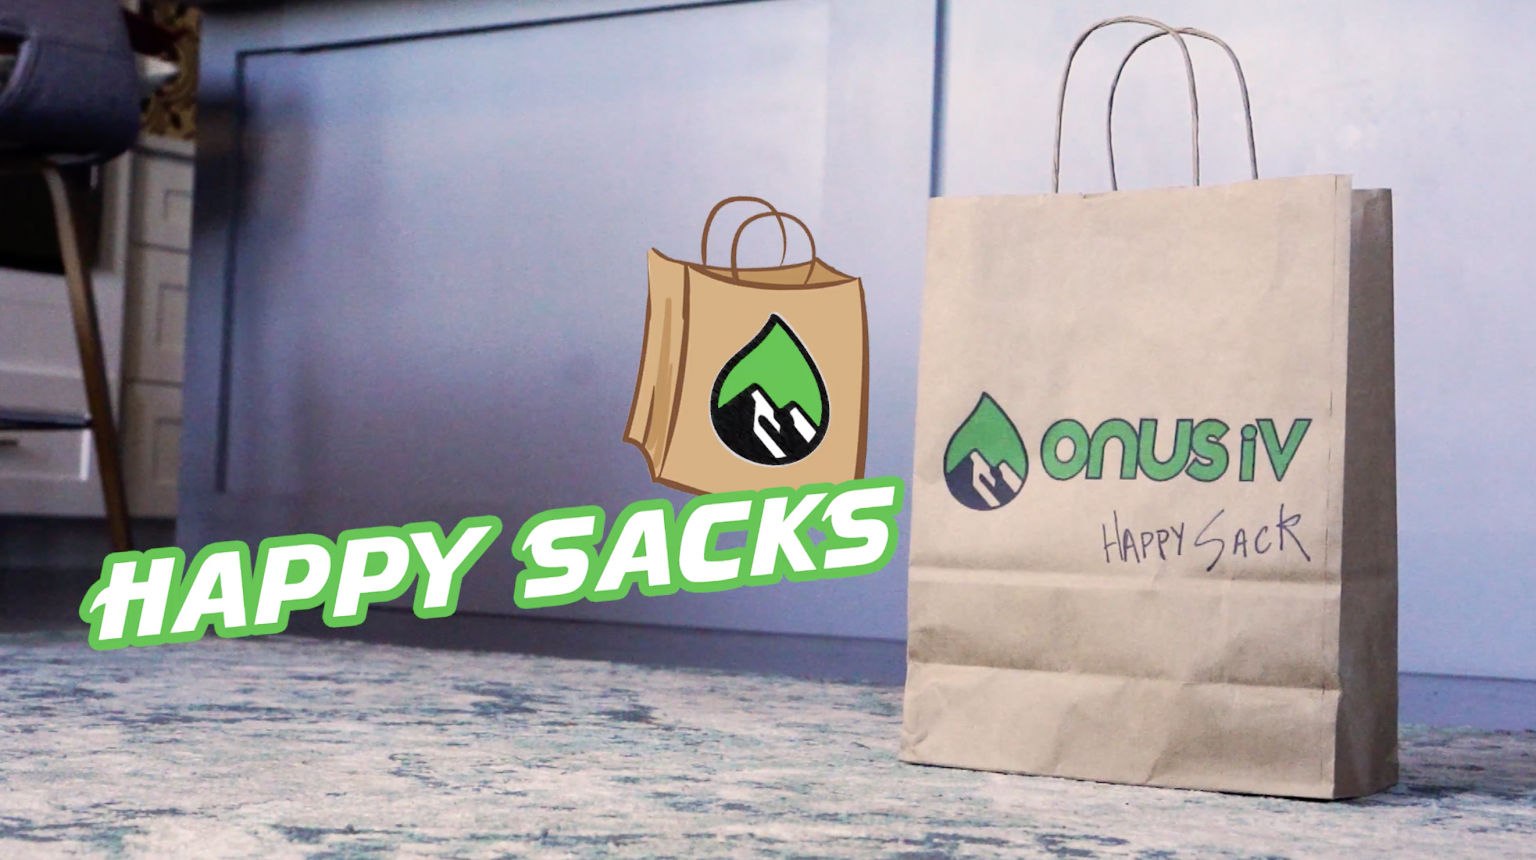 There's a whole new way to take of yourself Colorado! Introducing Happy Sacks, our latest bundle offering from Onus iV - Get an Aspen iV Drip, B12 Bundle and a Toy for only $200 dollars! Let's be real though, you want a toy more than anything; You could get an Onus Truck, Onus Van, or even an Onus Store! 
Happy Sacks, exclusively at Onus iV, but only for a limited time!
Onus iV - Live #yourbestdays